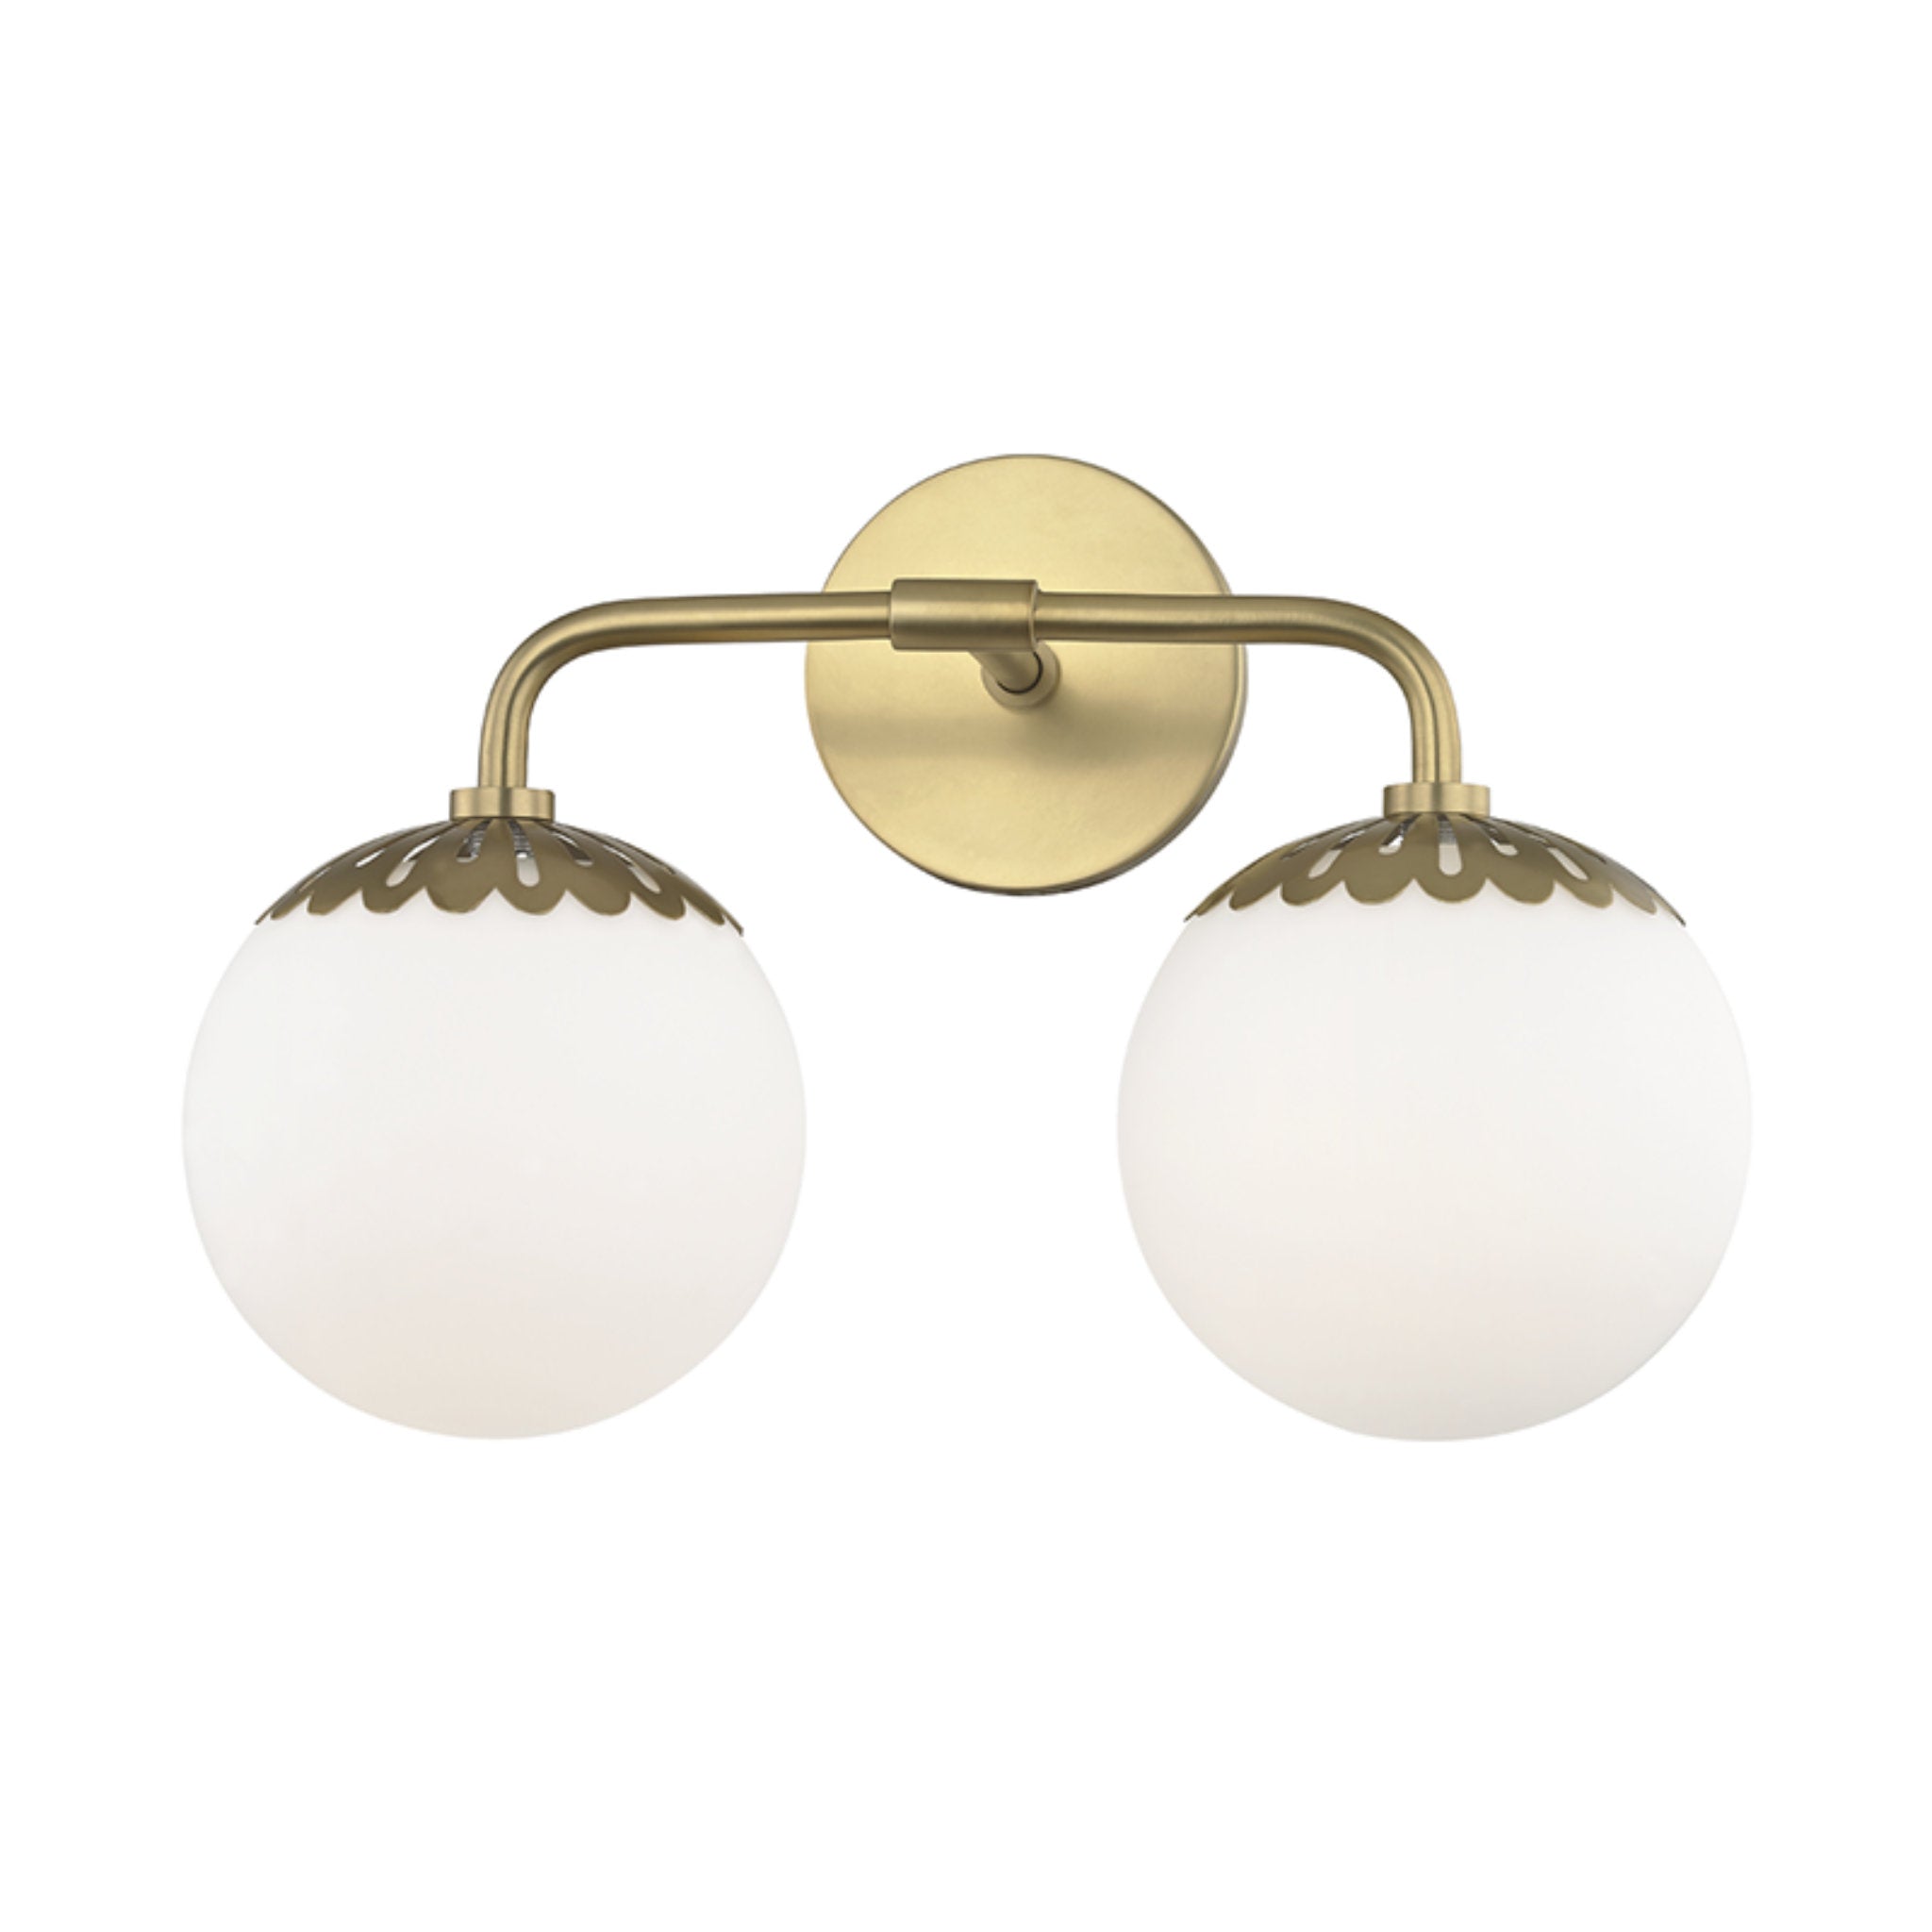 Paige 2-Light Bath and Vanity in Aged Brass